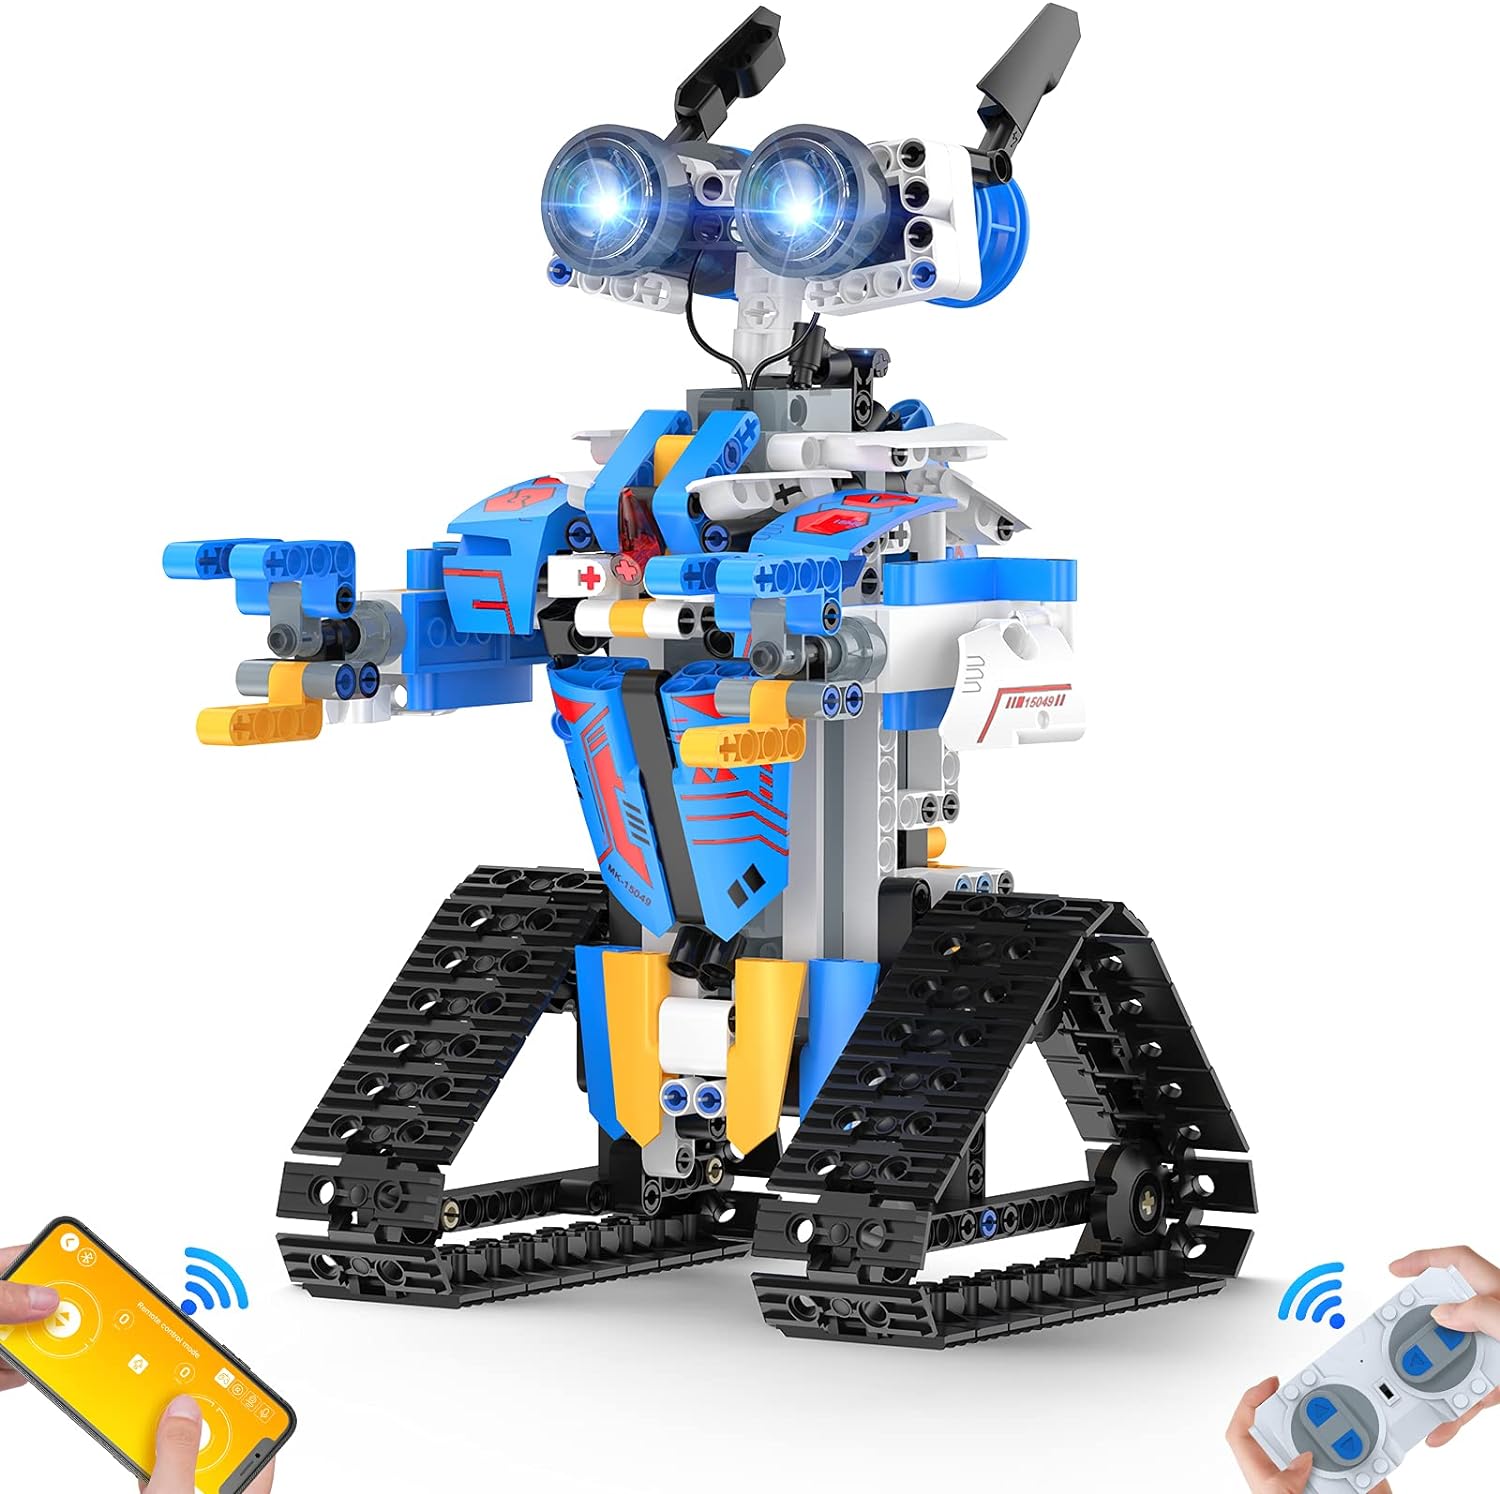 AOKESI Robot Toys for 8-16 Year Old Boys Girls Kids with APP or Remote Control Science Programmable Building Block Kit, STEM Projects Educational Birthday Gifts